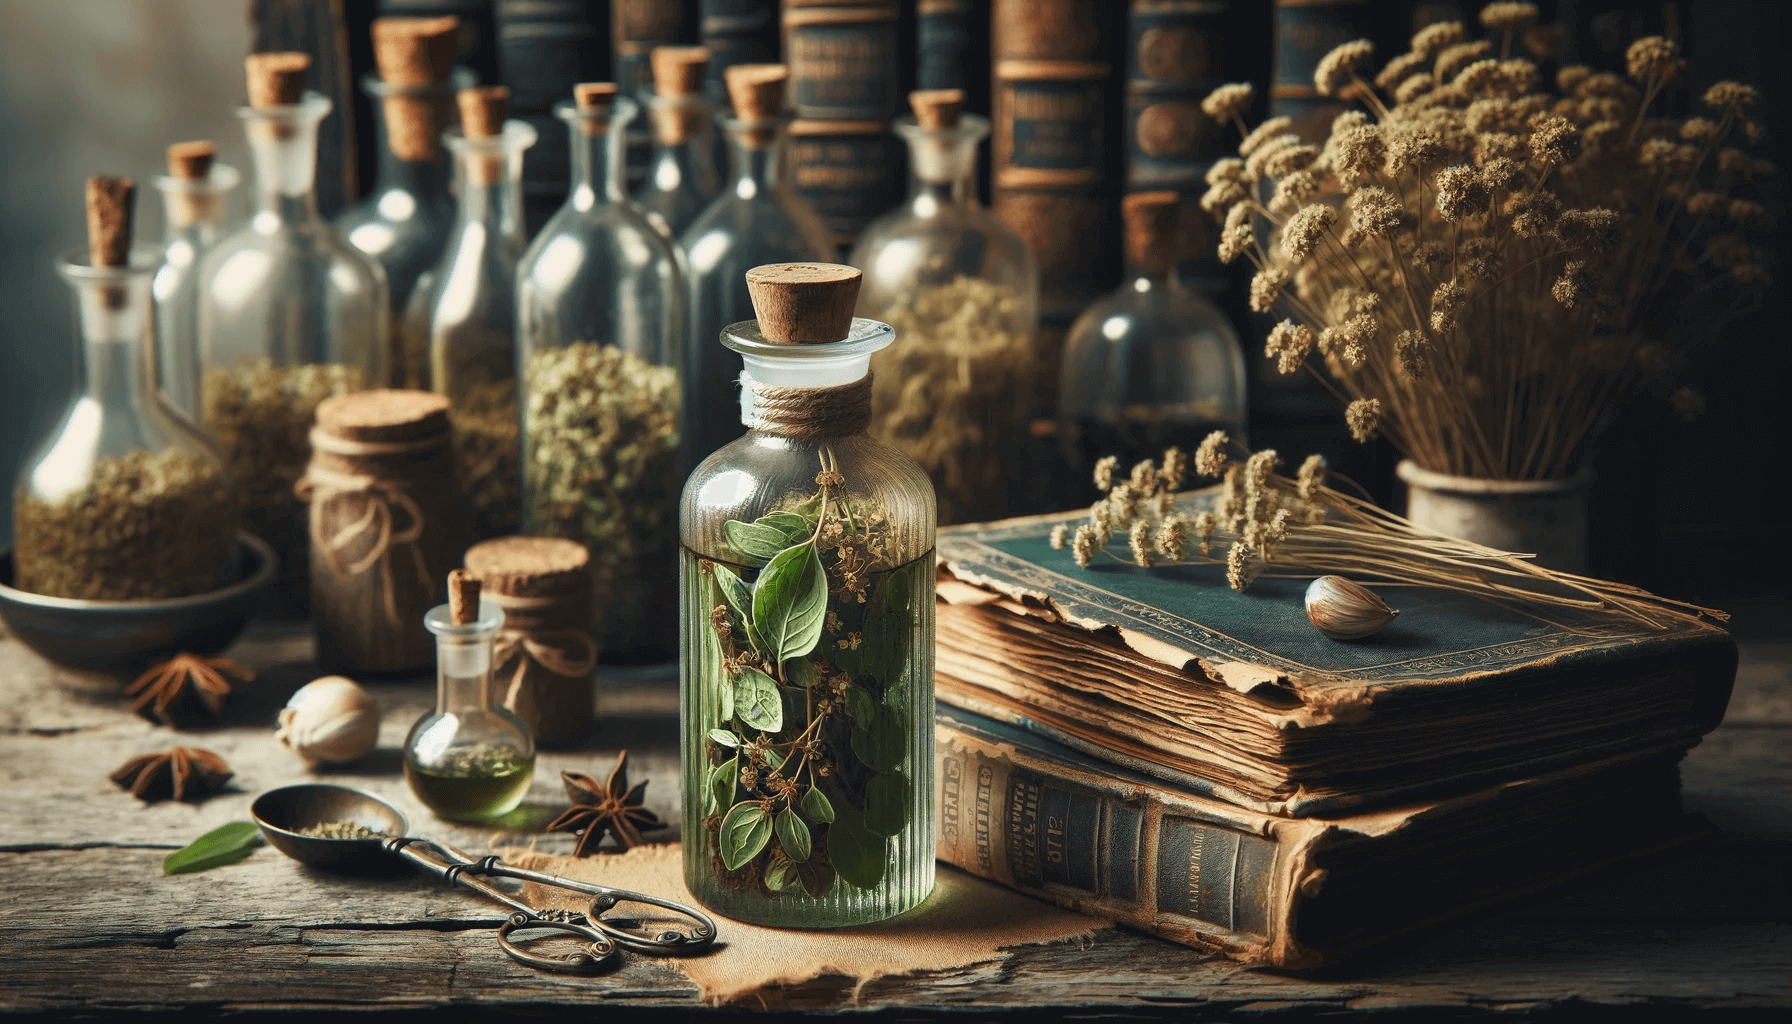 Oregano oil and old books about herbal medicine in the background